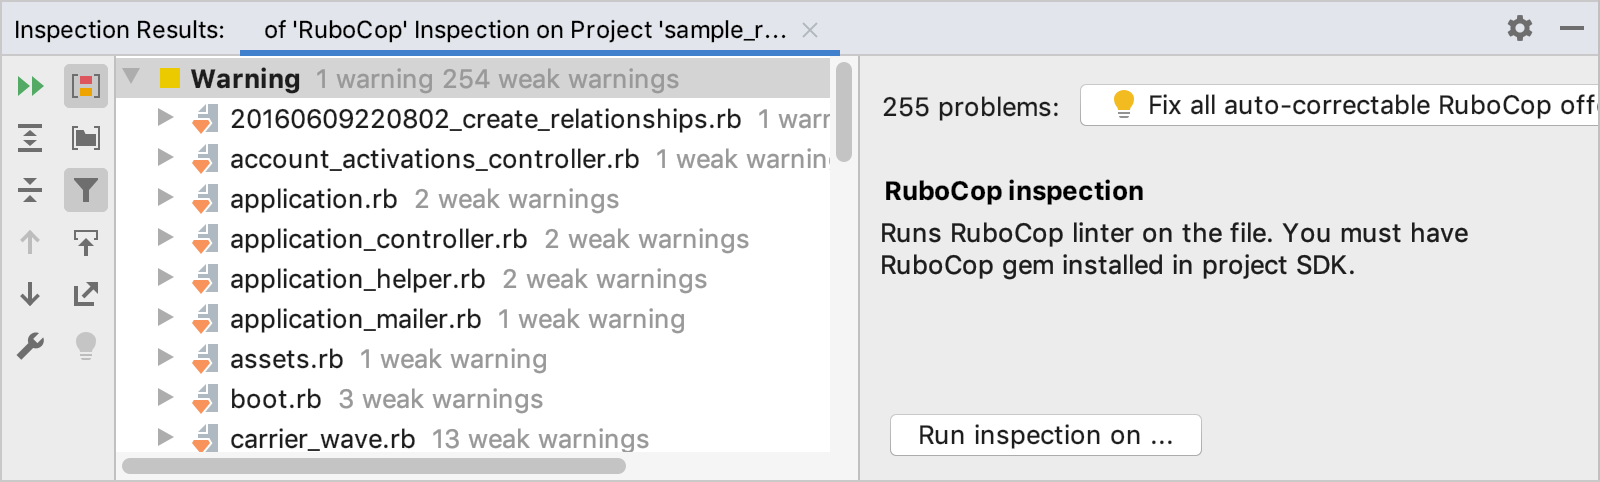 RuboCop inspection results